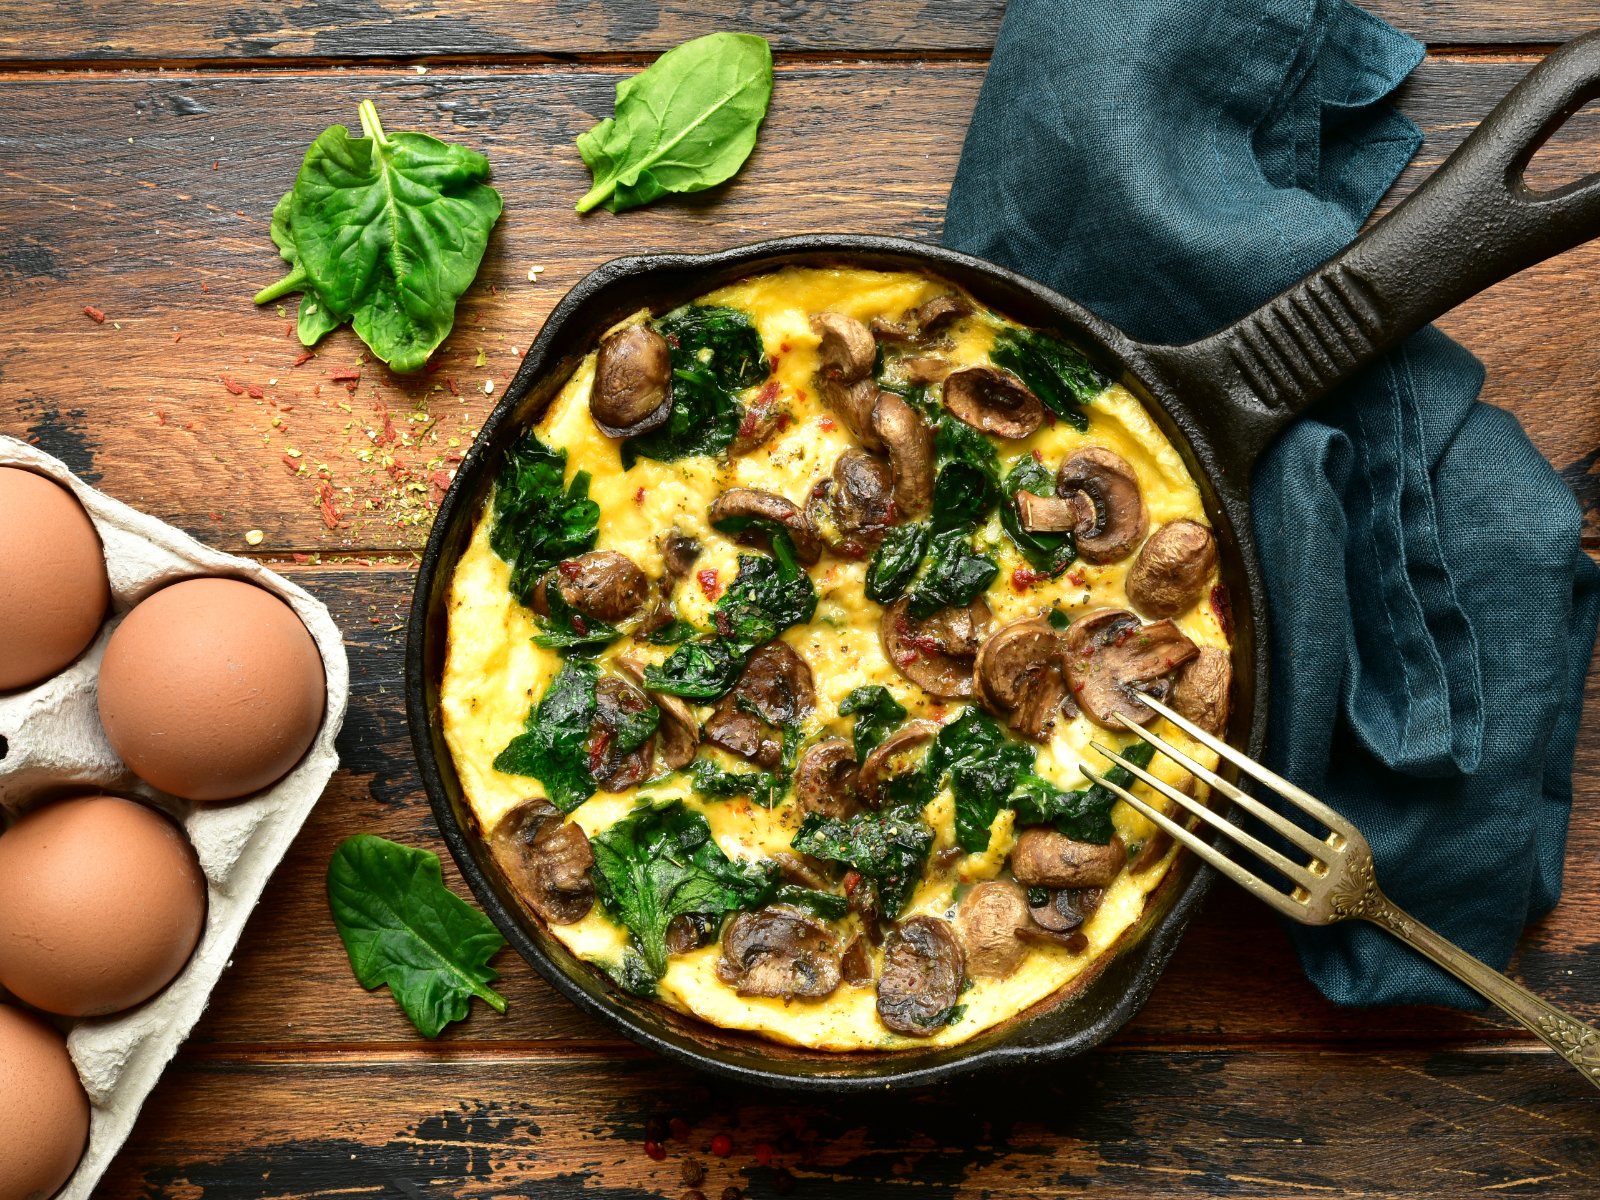 Scrambled eggs with spinach and mushrooms in a skillet